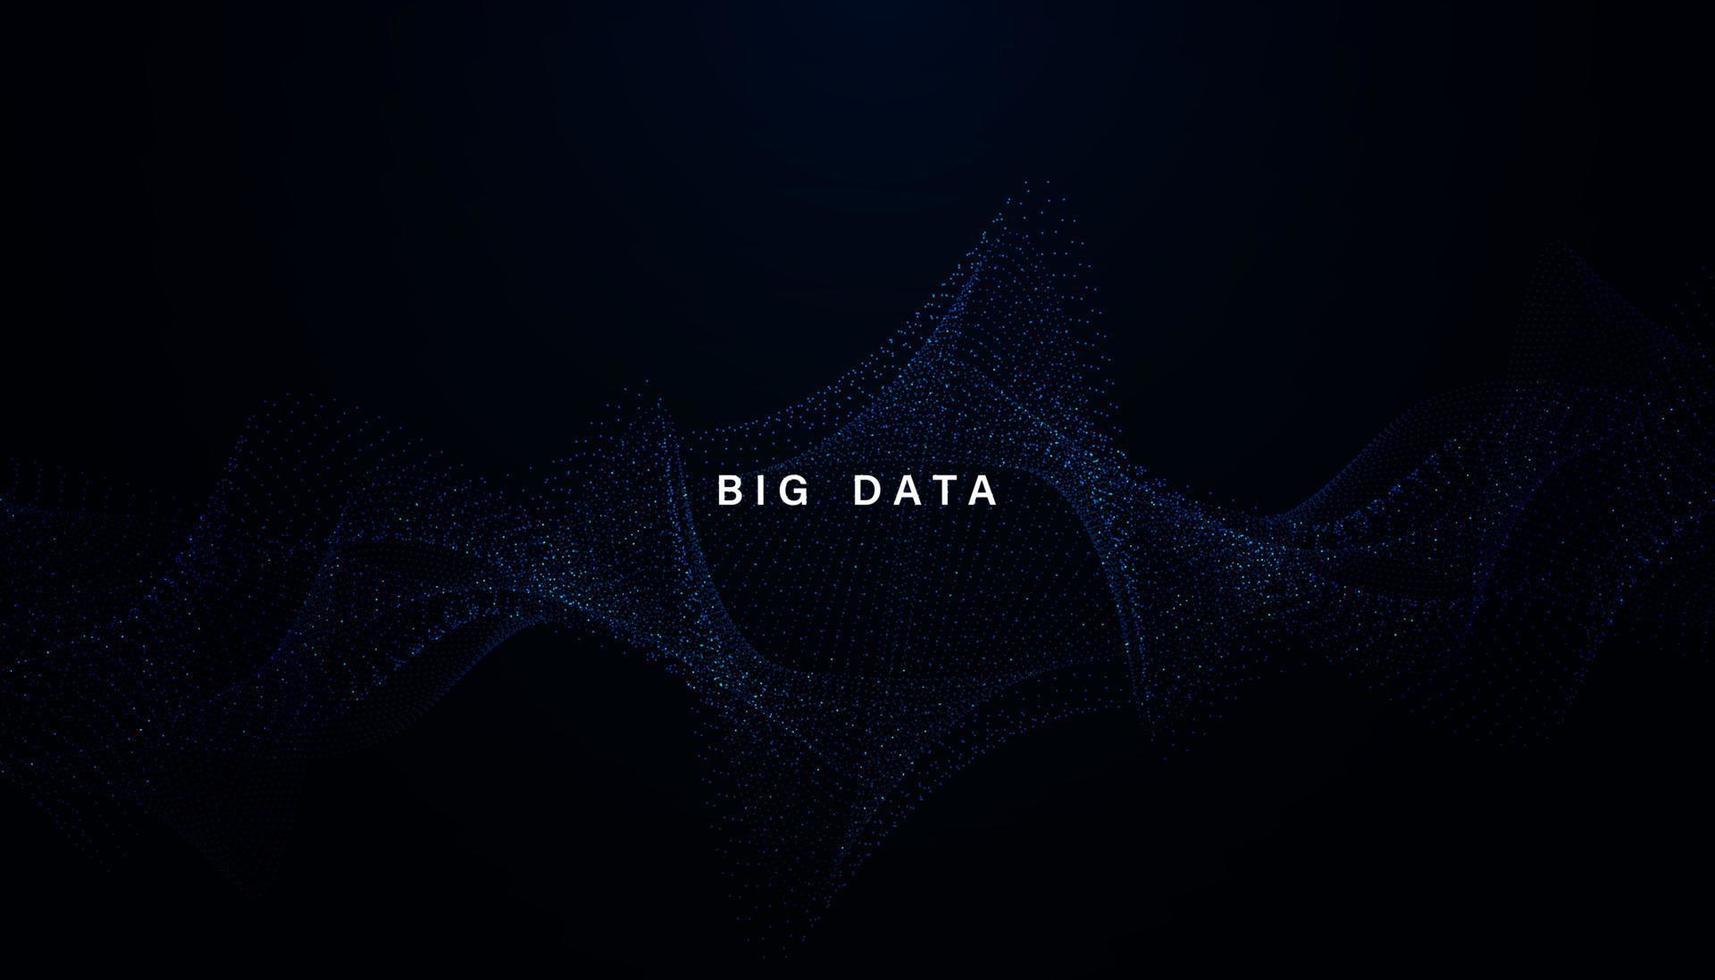 Abstract Big Data Vector Big Data Quantum design or the future, complexity of information. large social network insight In the form of a wave. Futuristic background.